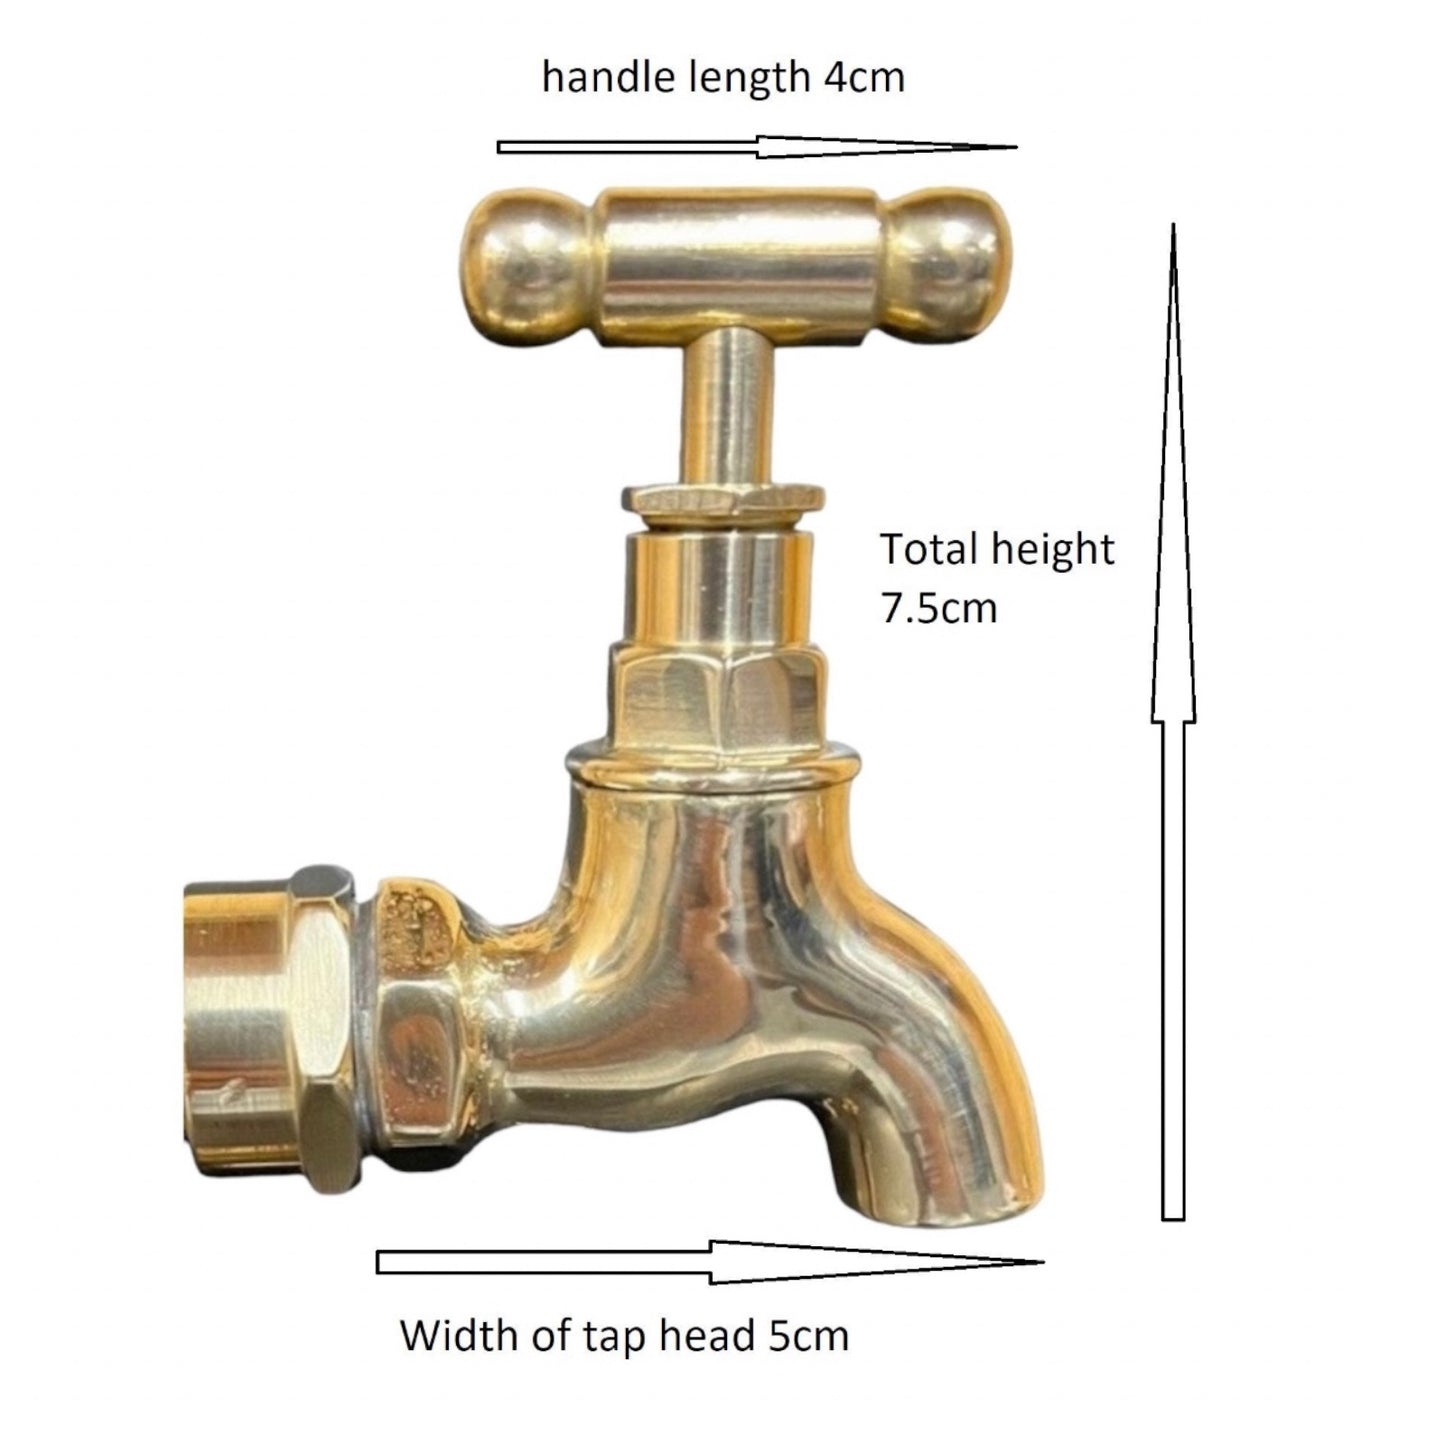 Brass and Copper Tall Pillar Taps, Small Kitchen Sink Taps, Bathroom or Cloakroom Taps (T35)